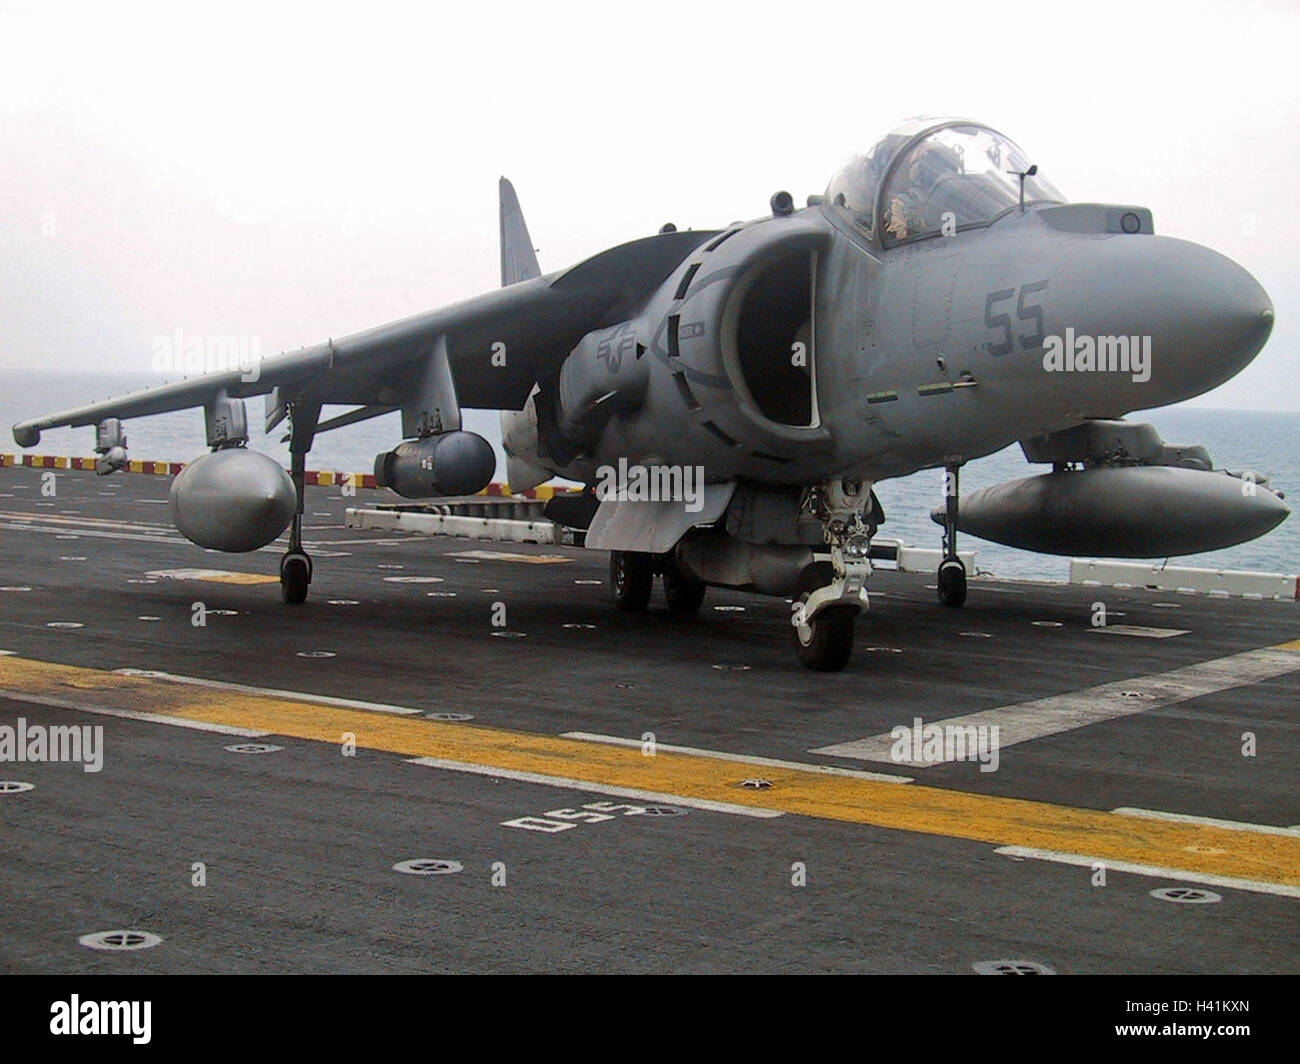 28th January 2003 Operation Enduring Freedom: a U.S. Marines Harrier jump jet on the USS Nassau, in the Persian Gulf. Stock Photo